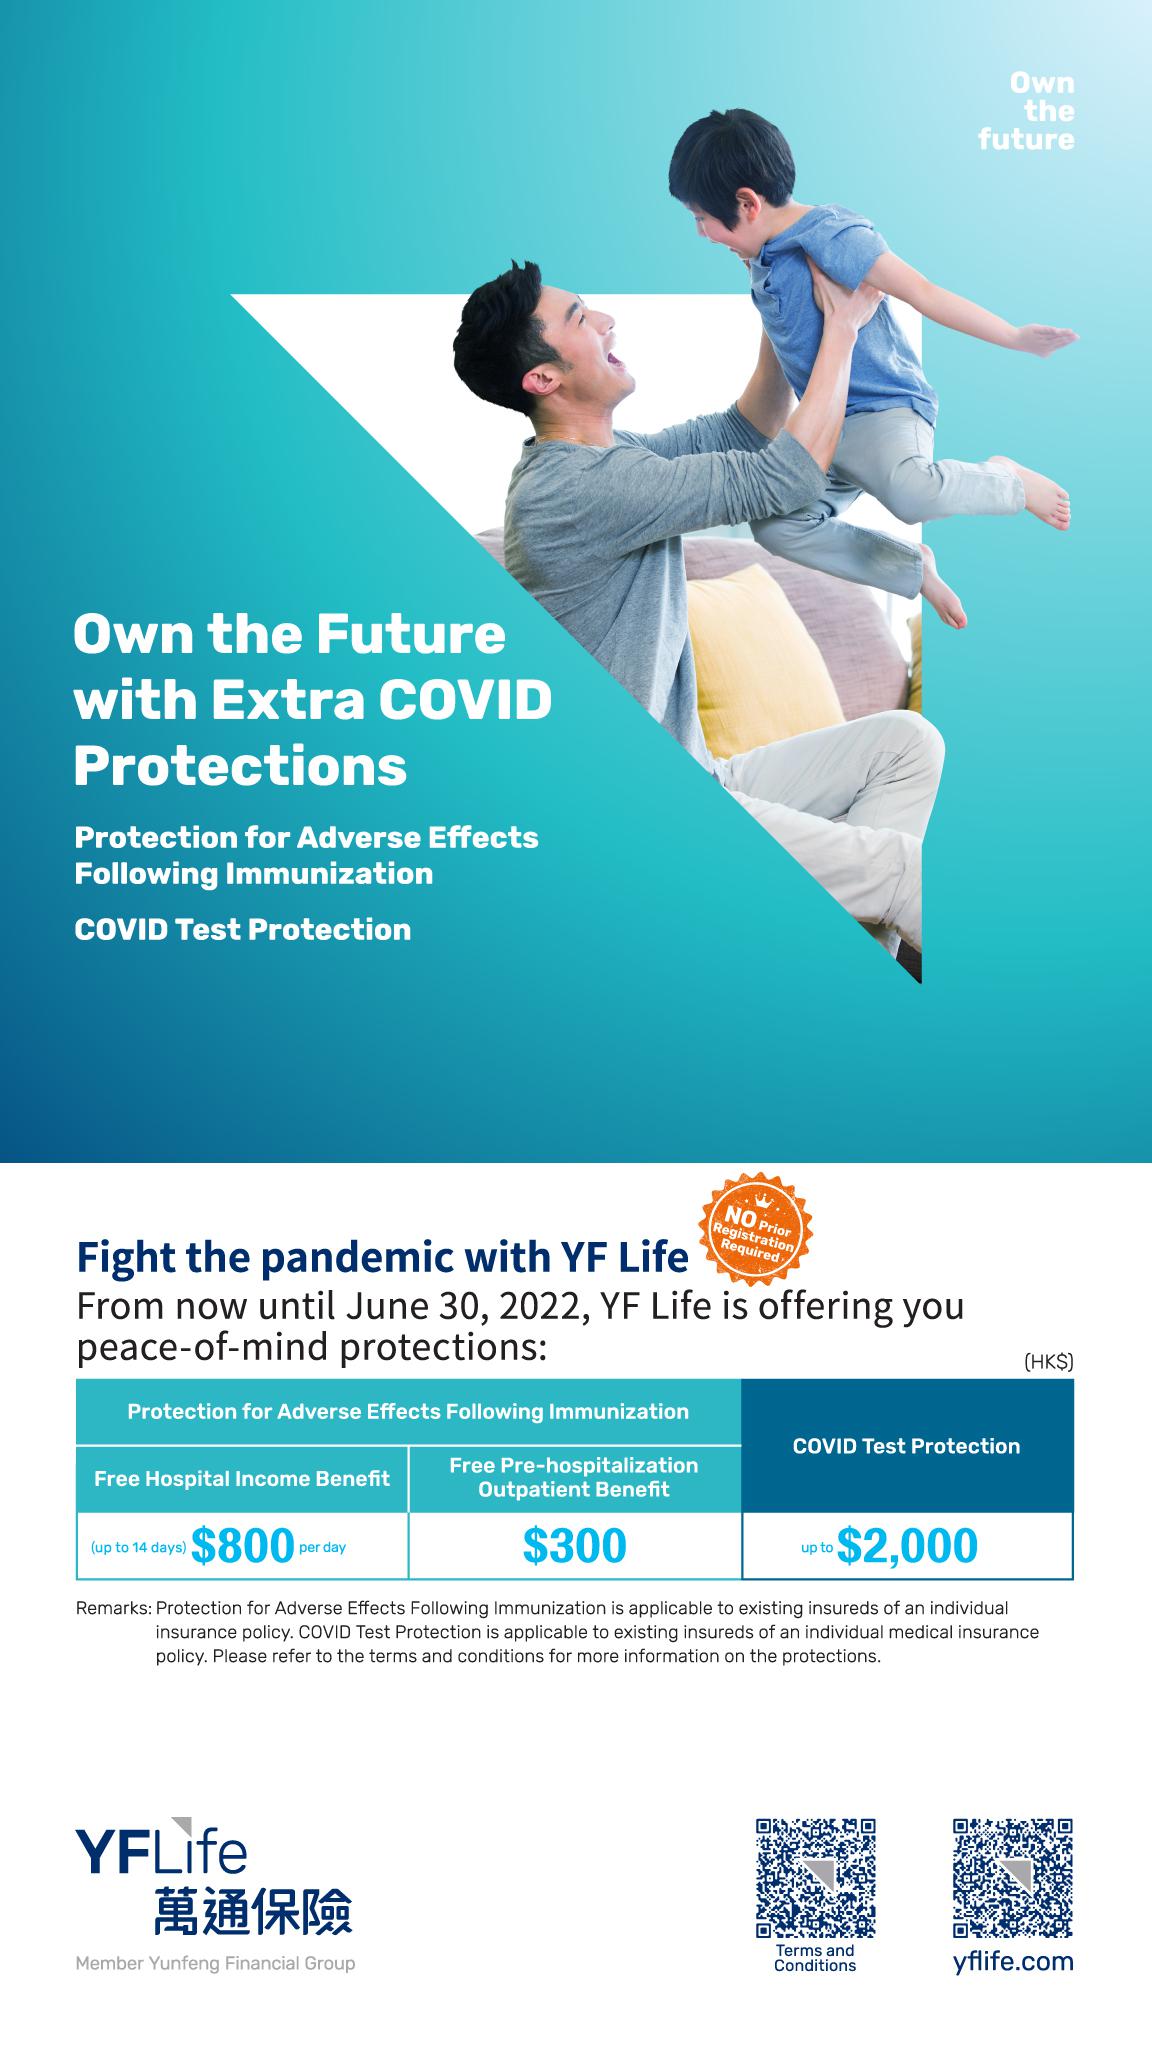 YF Life offers free “Protection for Adverse Effects Following Immunization” plus “COVID Test Protection”.